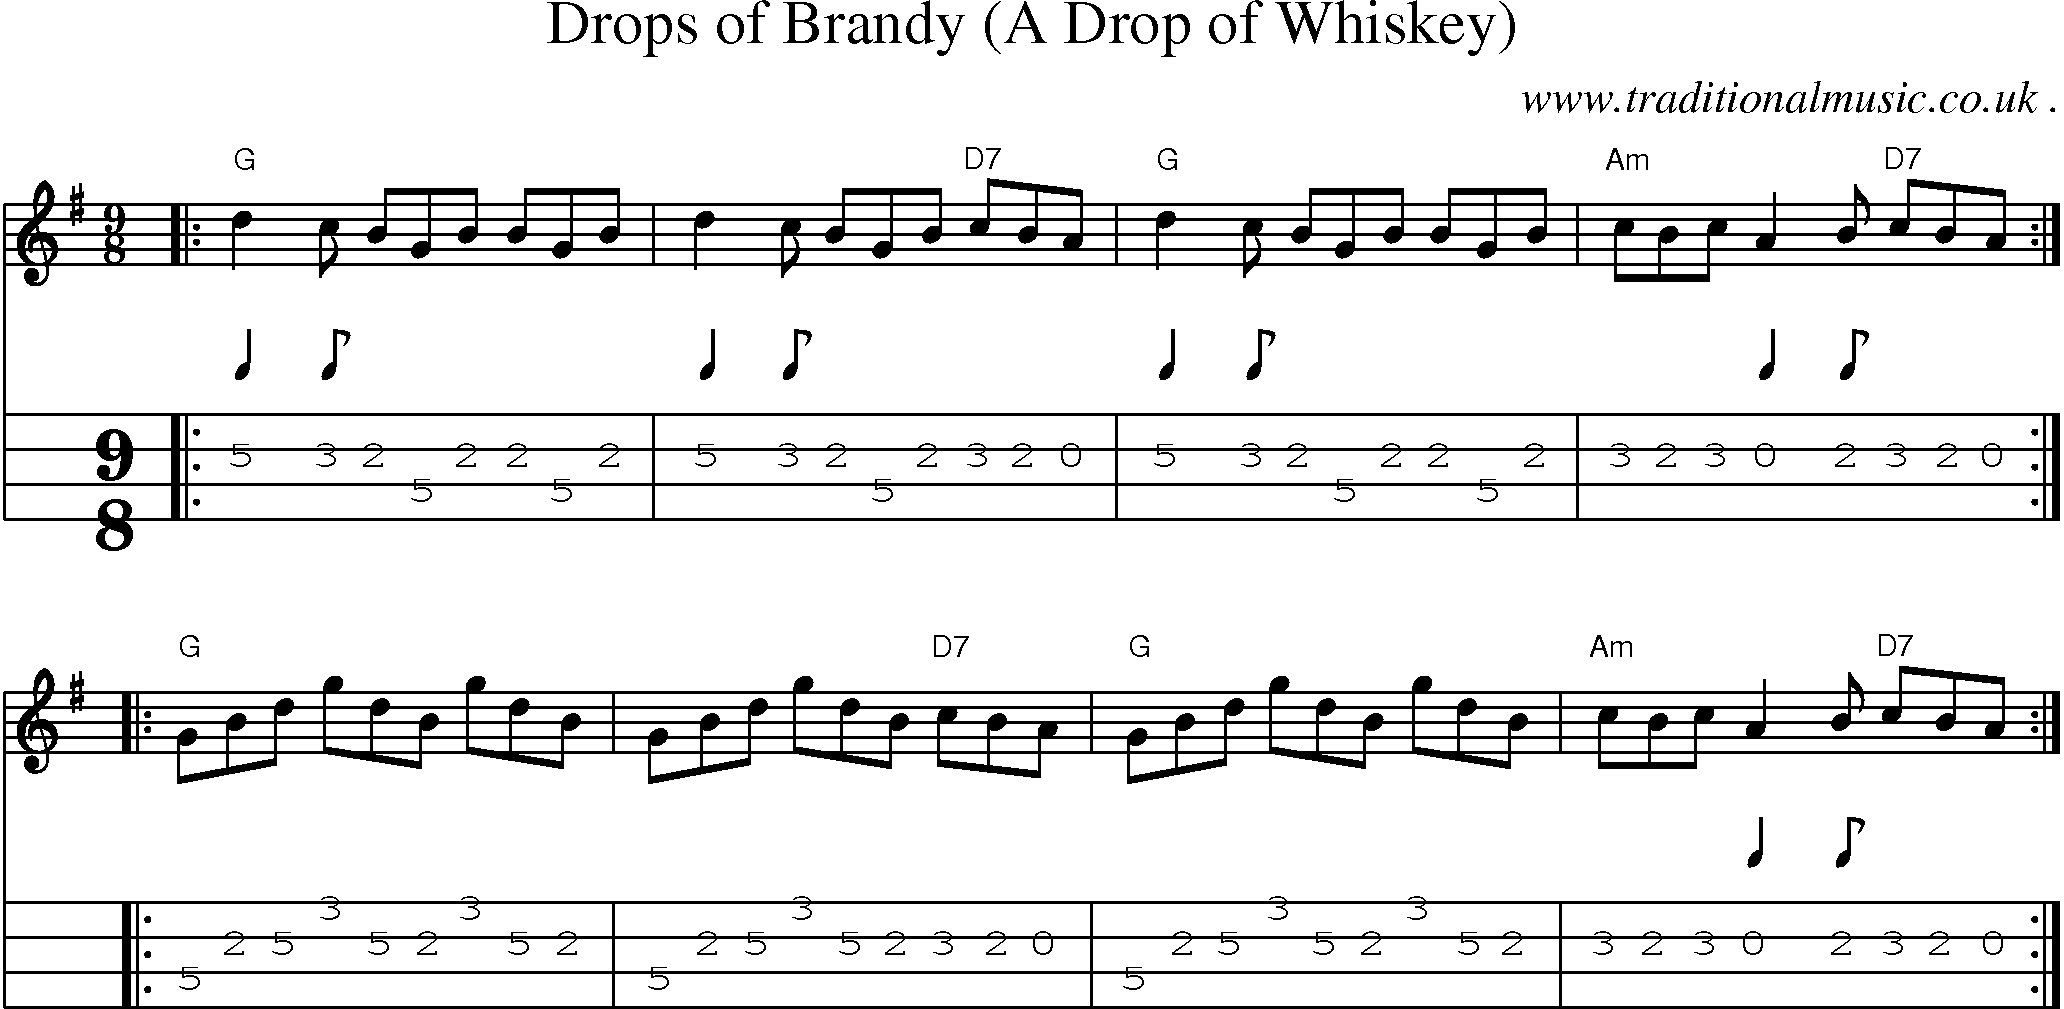 Sheet-music  score, Chords and Mandolin Tabs for Drops Of Brandy A Drop Of Whiskey